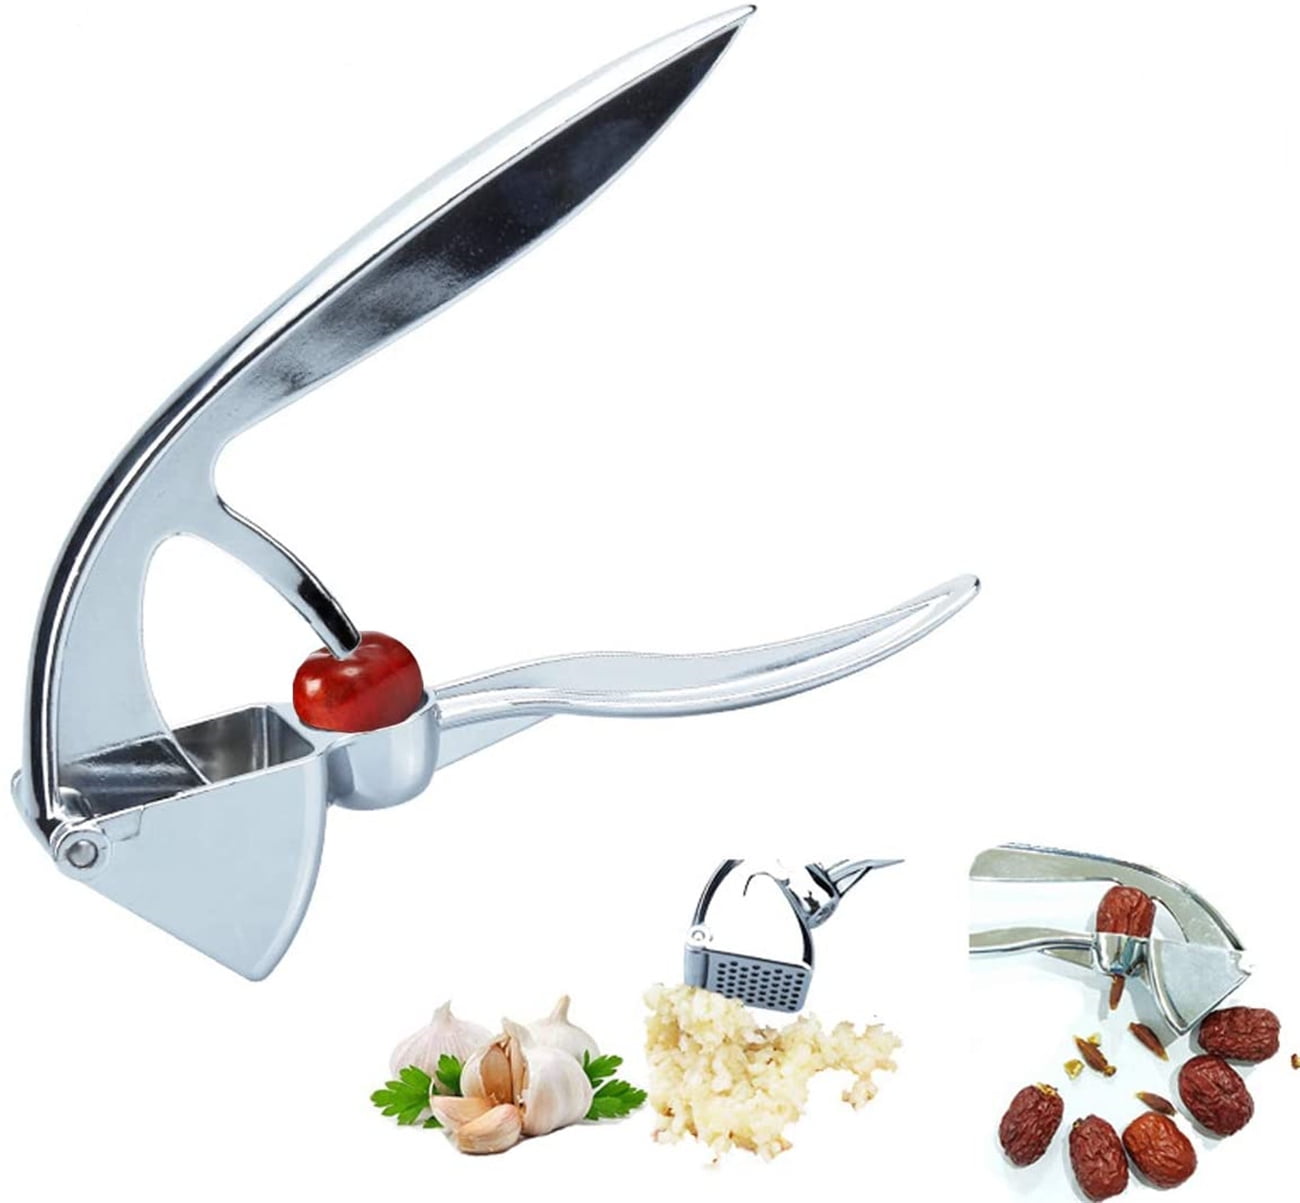 Jujube and Red Date Suitable for Cherry Cherry Pitter Cherry Pitter Tool Olive Pitter Tool Cherry Pitter Stainless Steel Fruit Pit Remover Cherry Pitter Remover Portable Hawthorn 2 Pack 